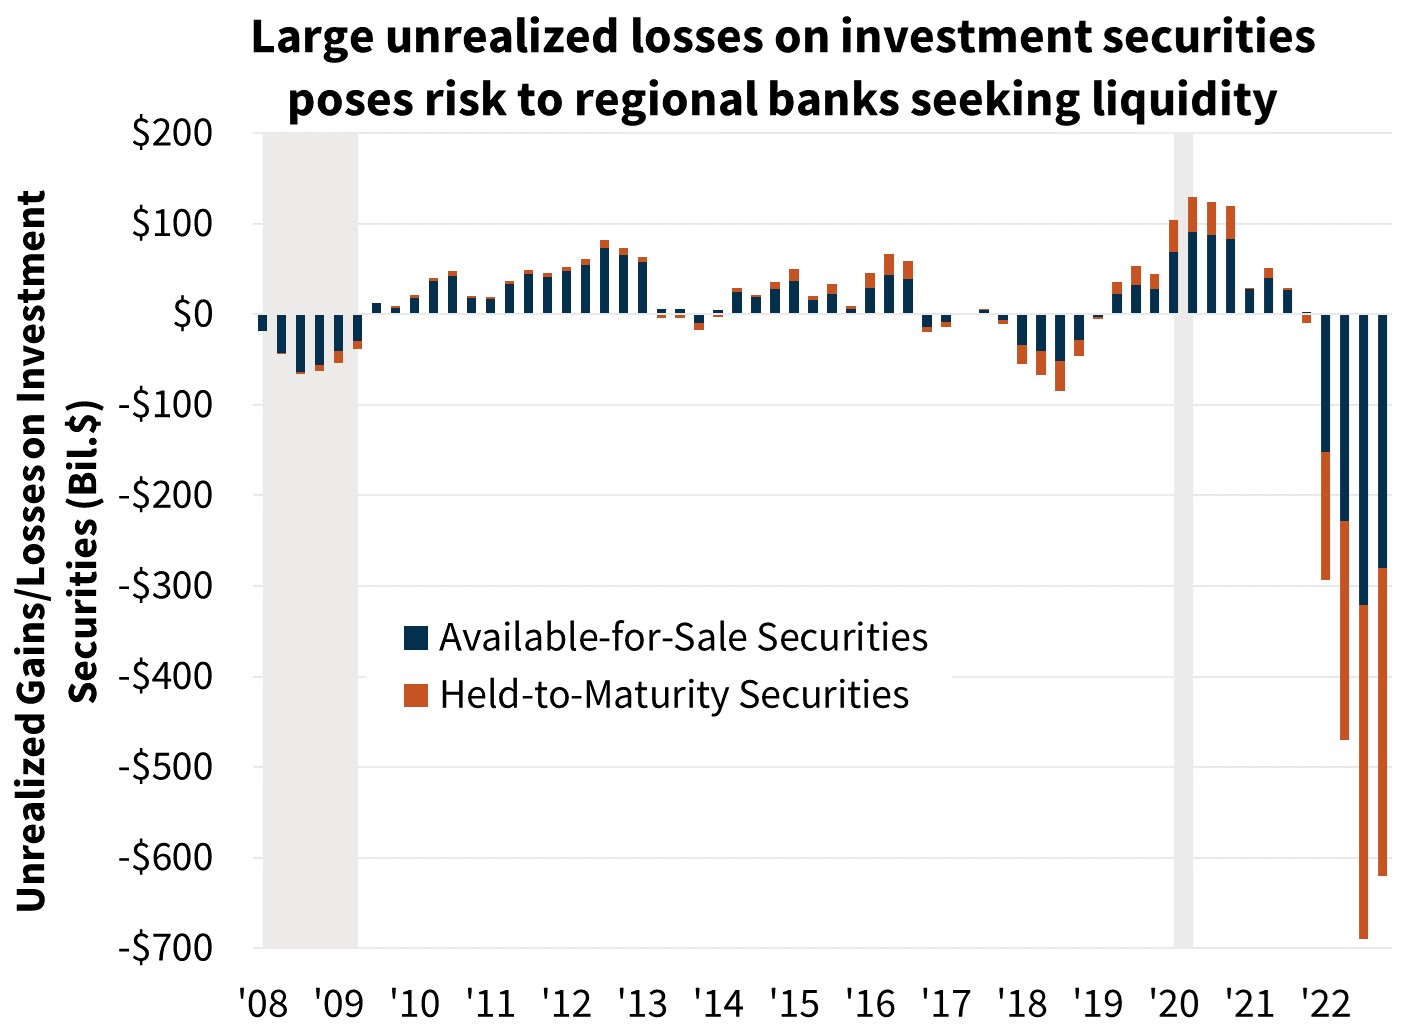  Large unrealized losses on investment securities poses risk to regional banks seeking liquidity  